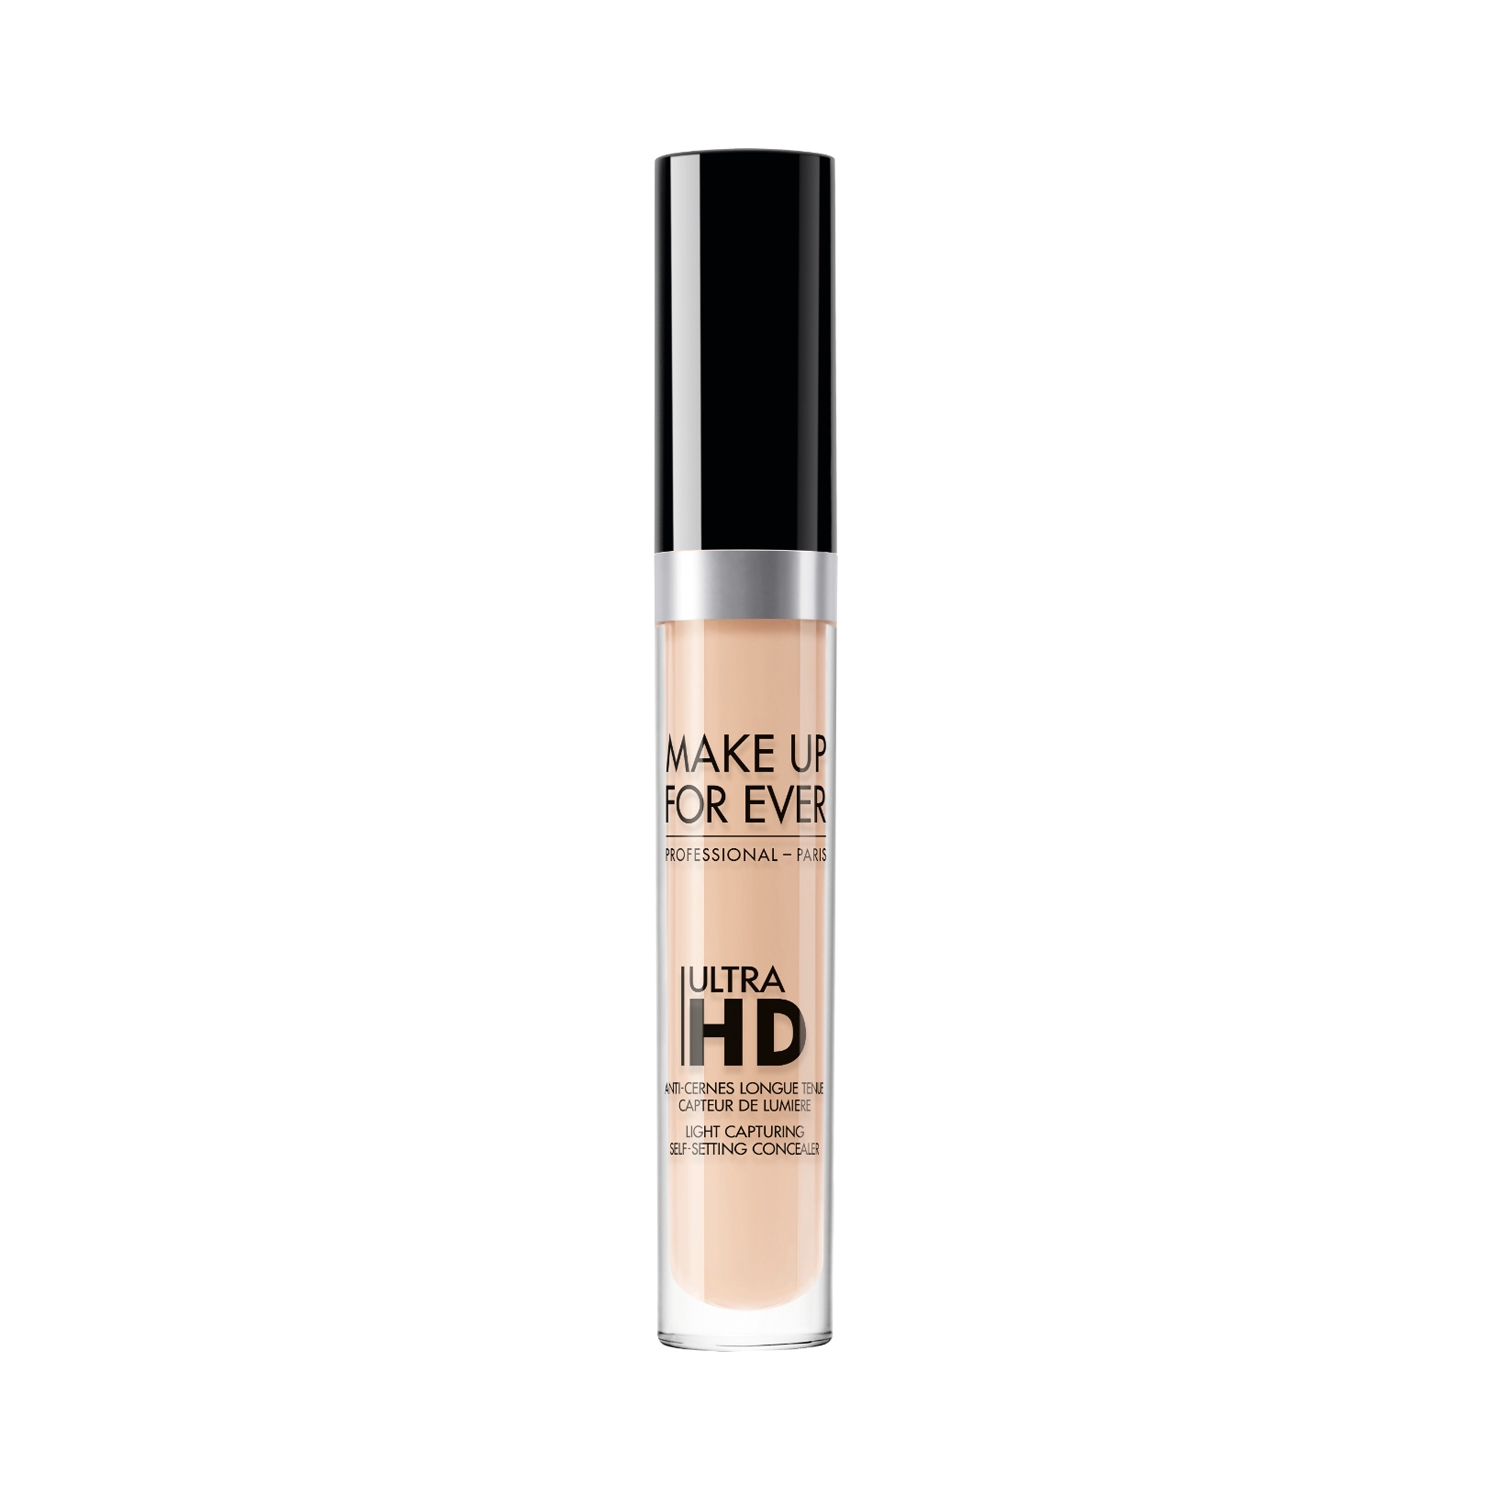 Make Up For Ever | Make Up For Ever Ultra HD Concealer Invisible Cover Concealer - 21 Cinnamon (5ml)